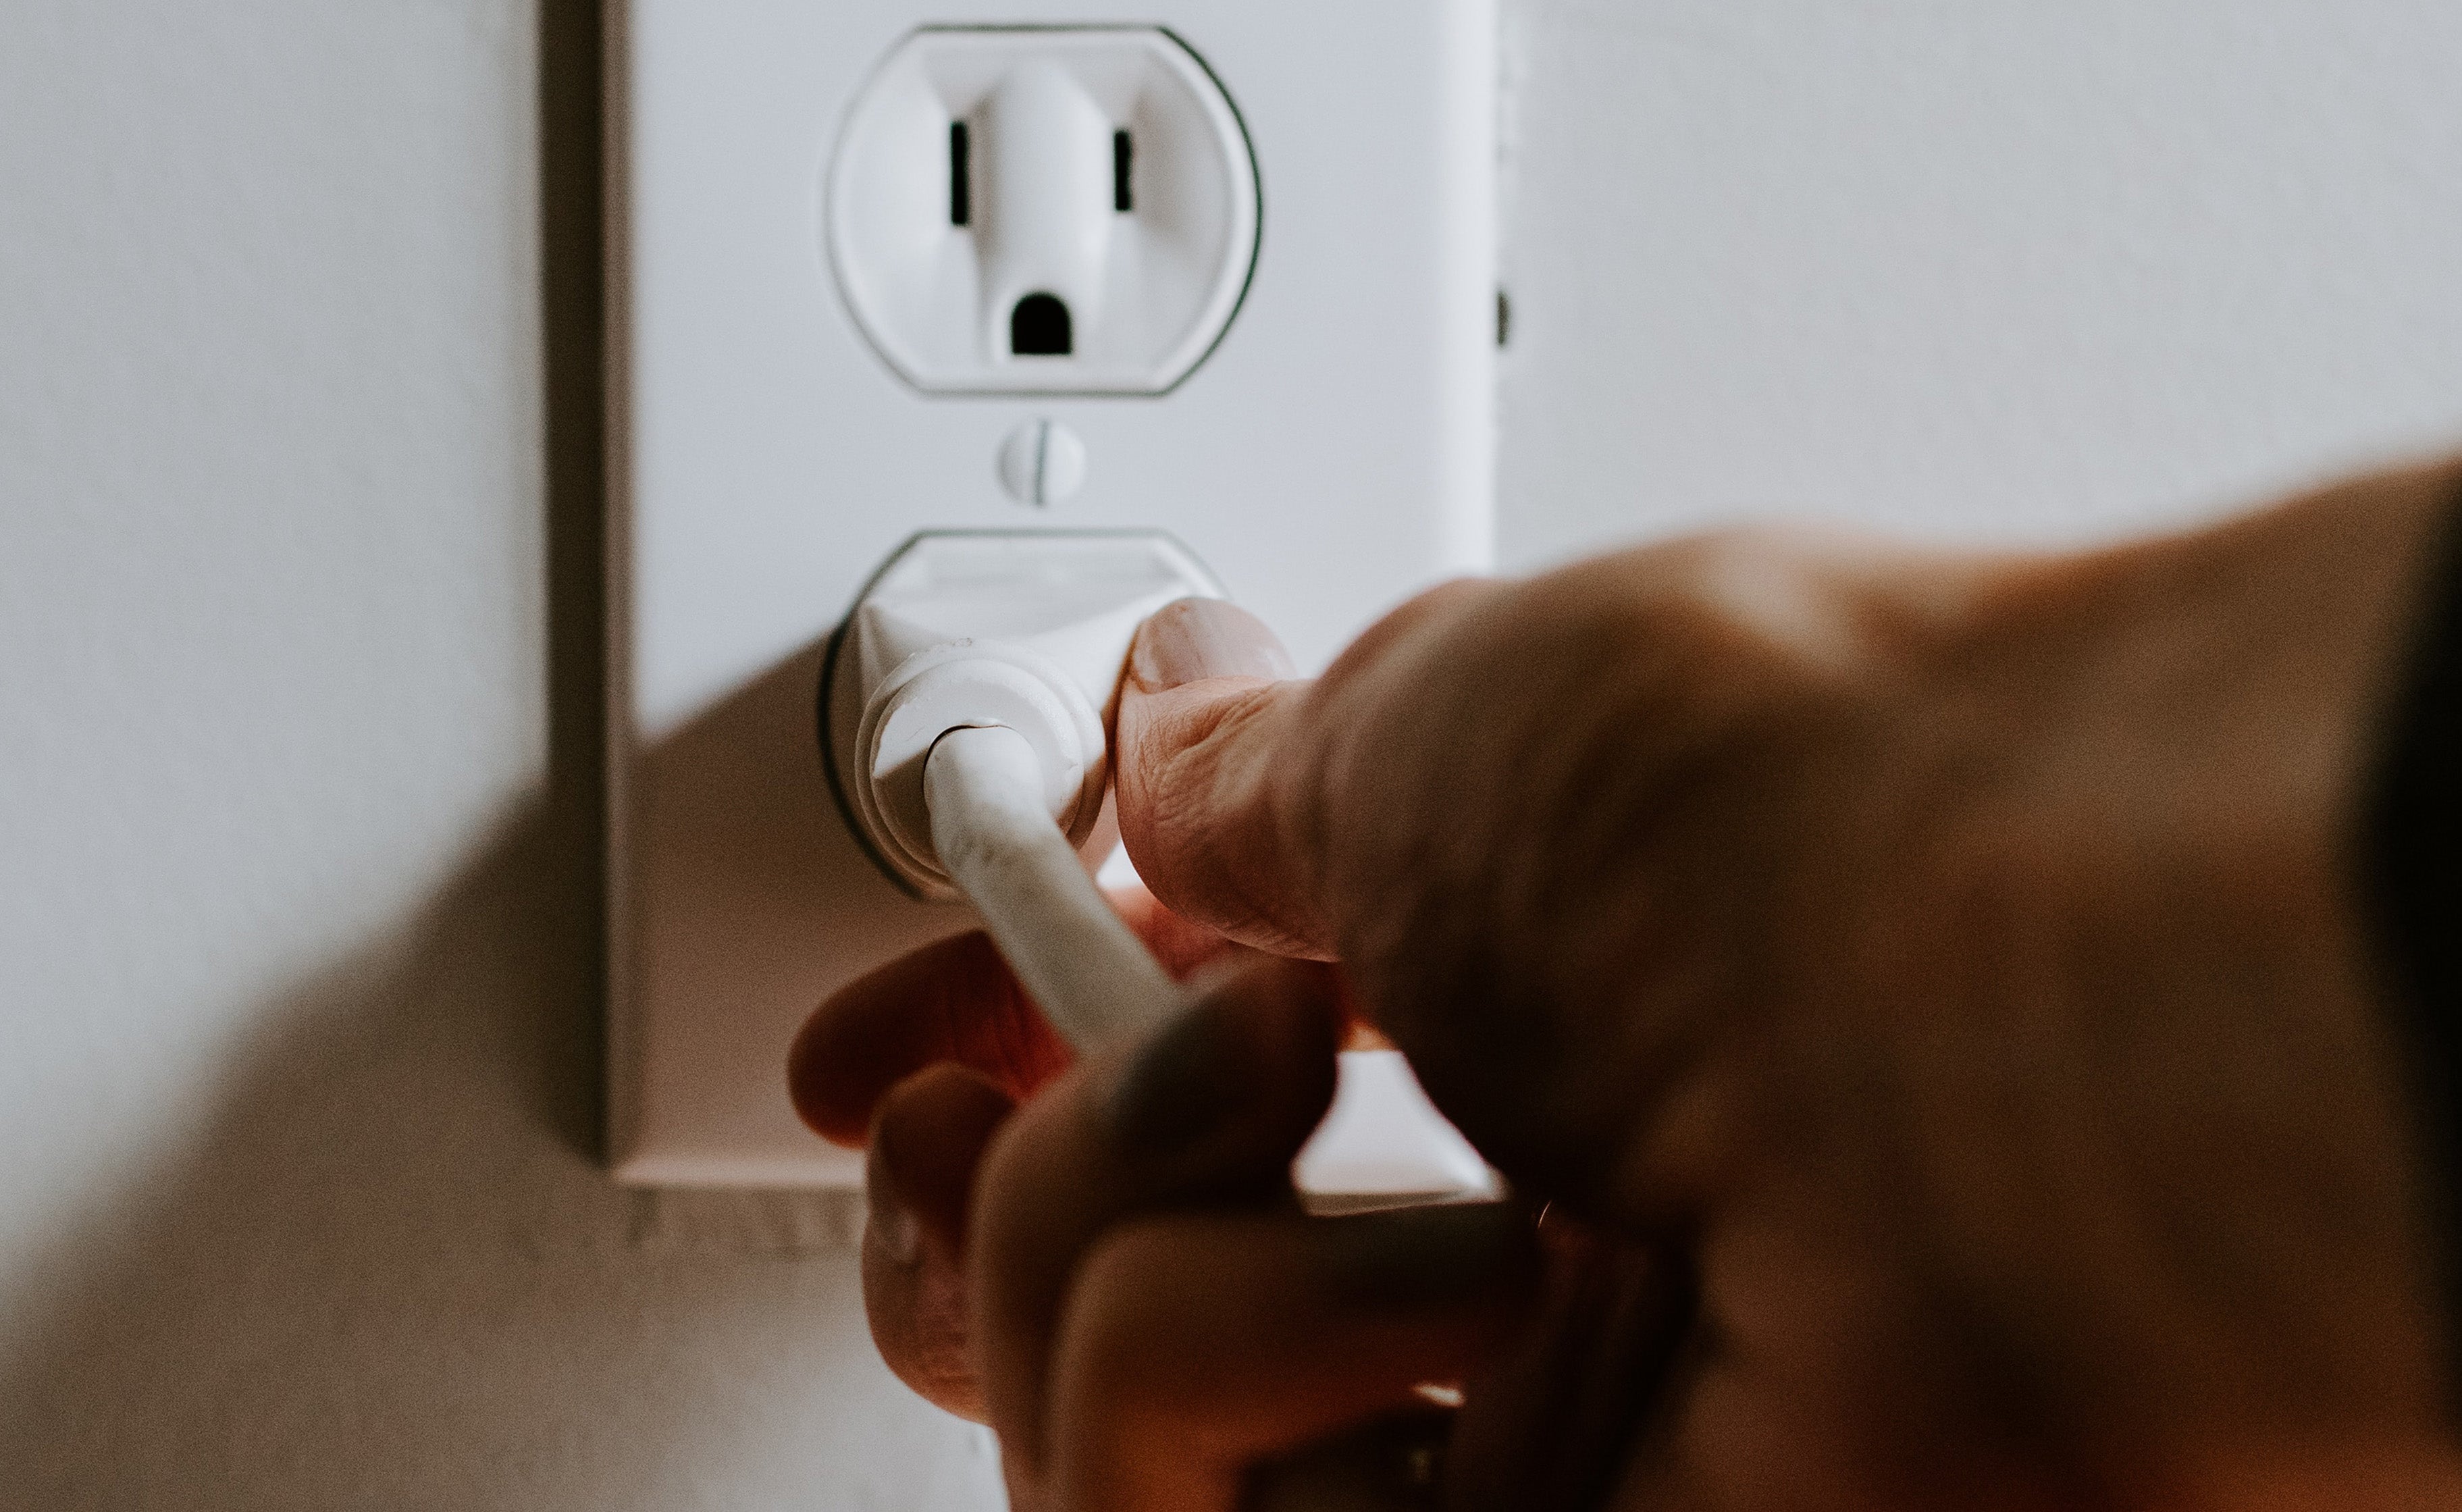 Hand pulling plug from outlet